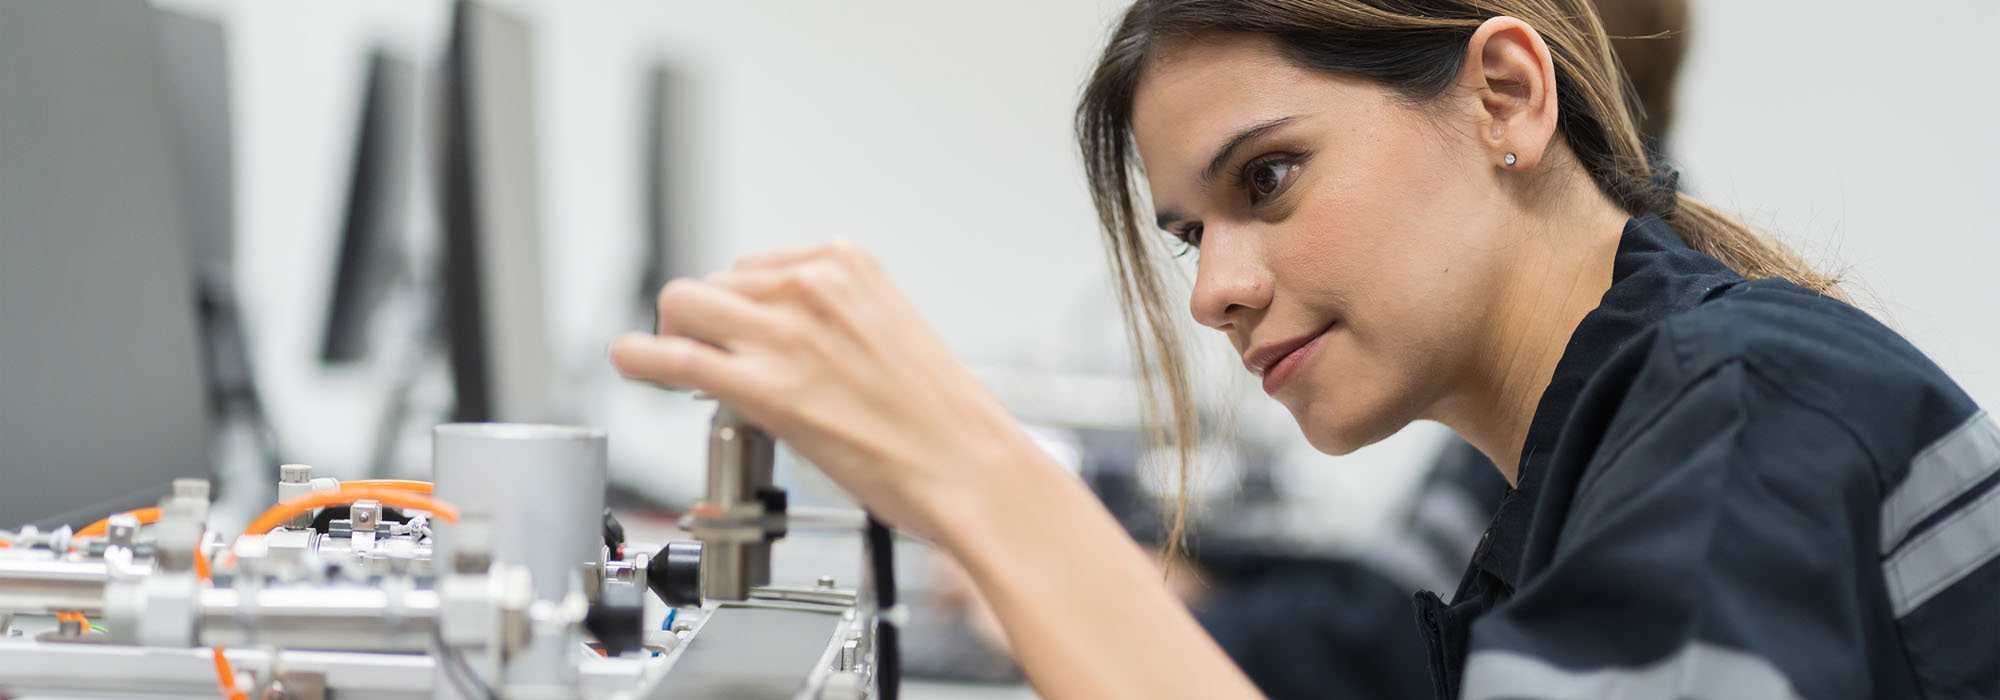 A young female is hands-on with an engineering programmable logic controller kit in the laboratory room